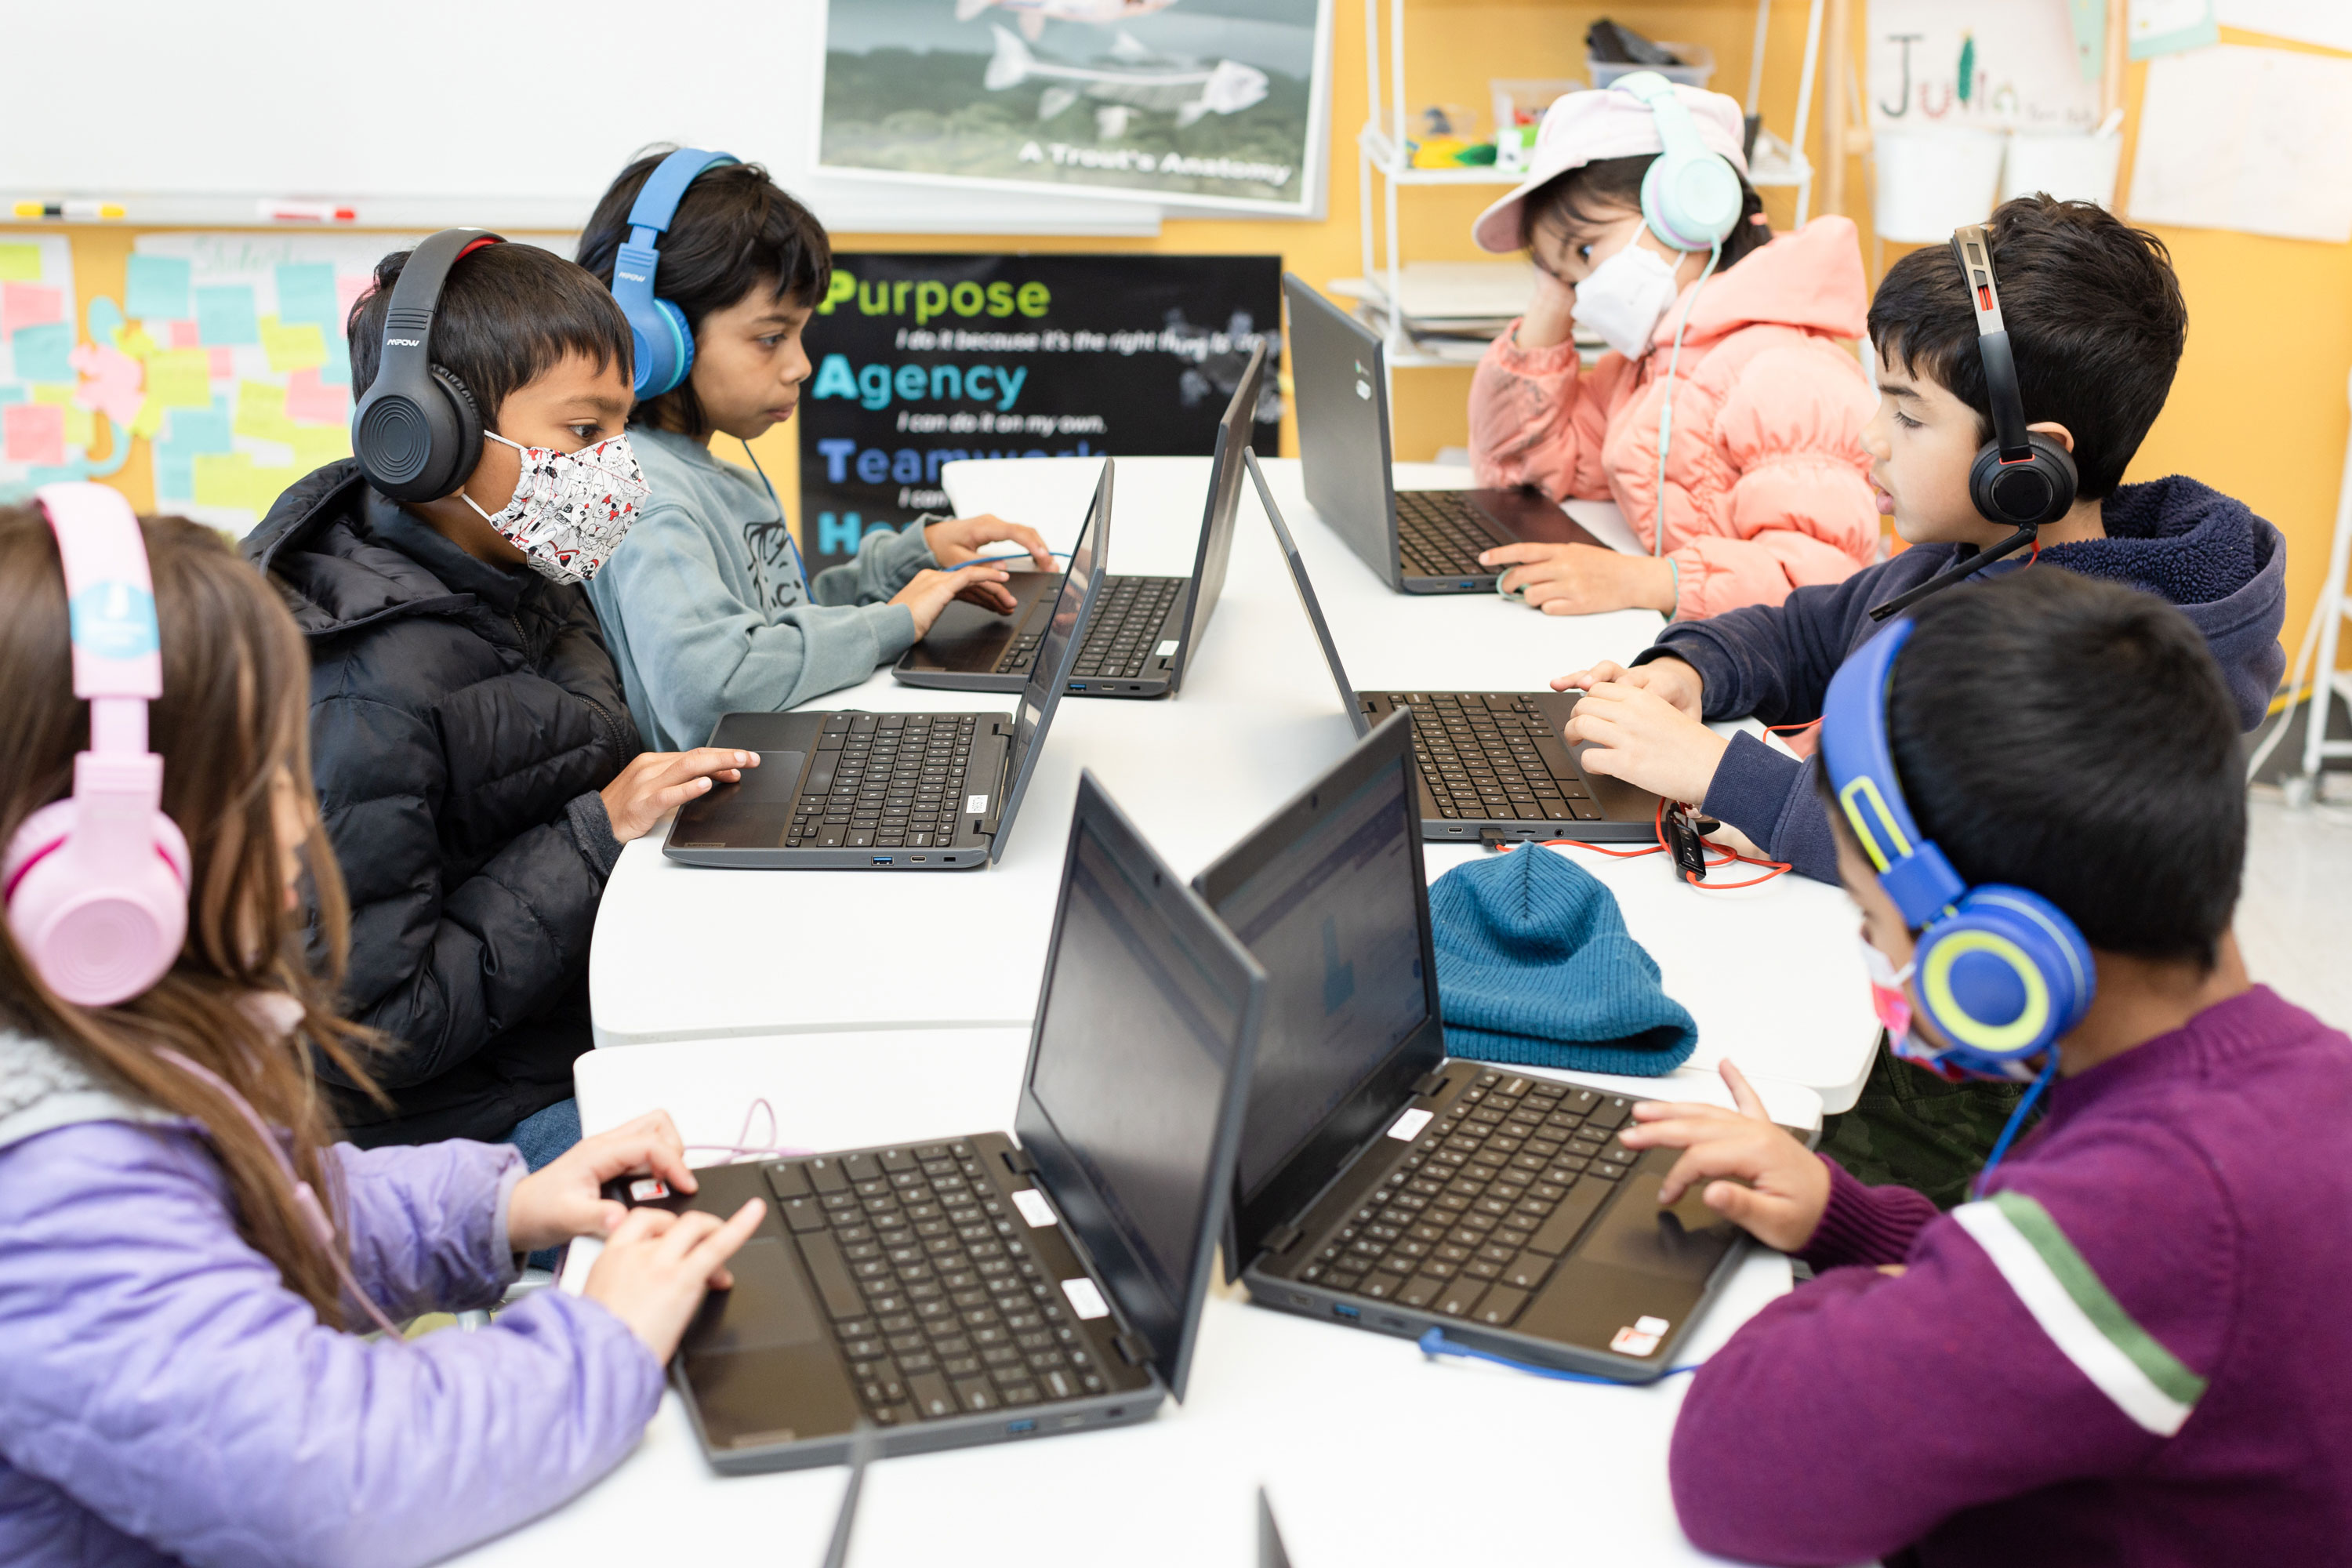 Children work on a classroom exercise using Khanmigo, an AI-powered guide developed by Khan Academy, during a math and sciences class at Khan Lab School.